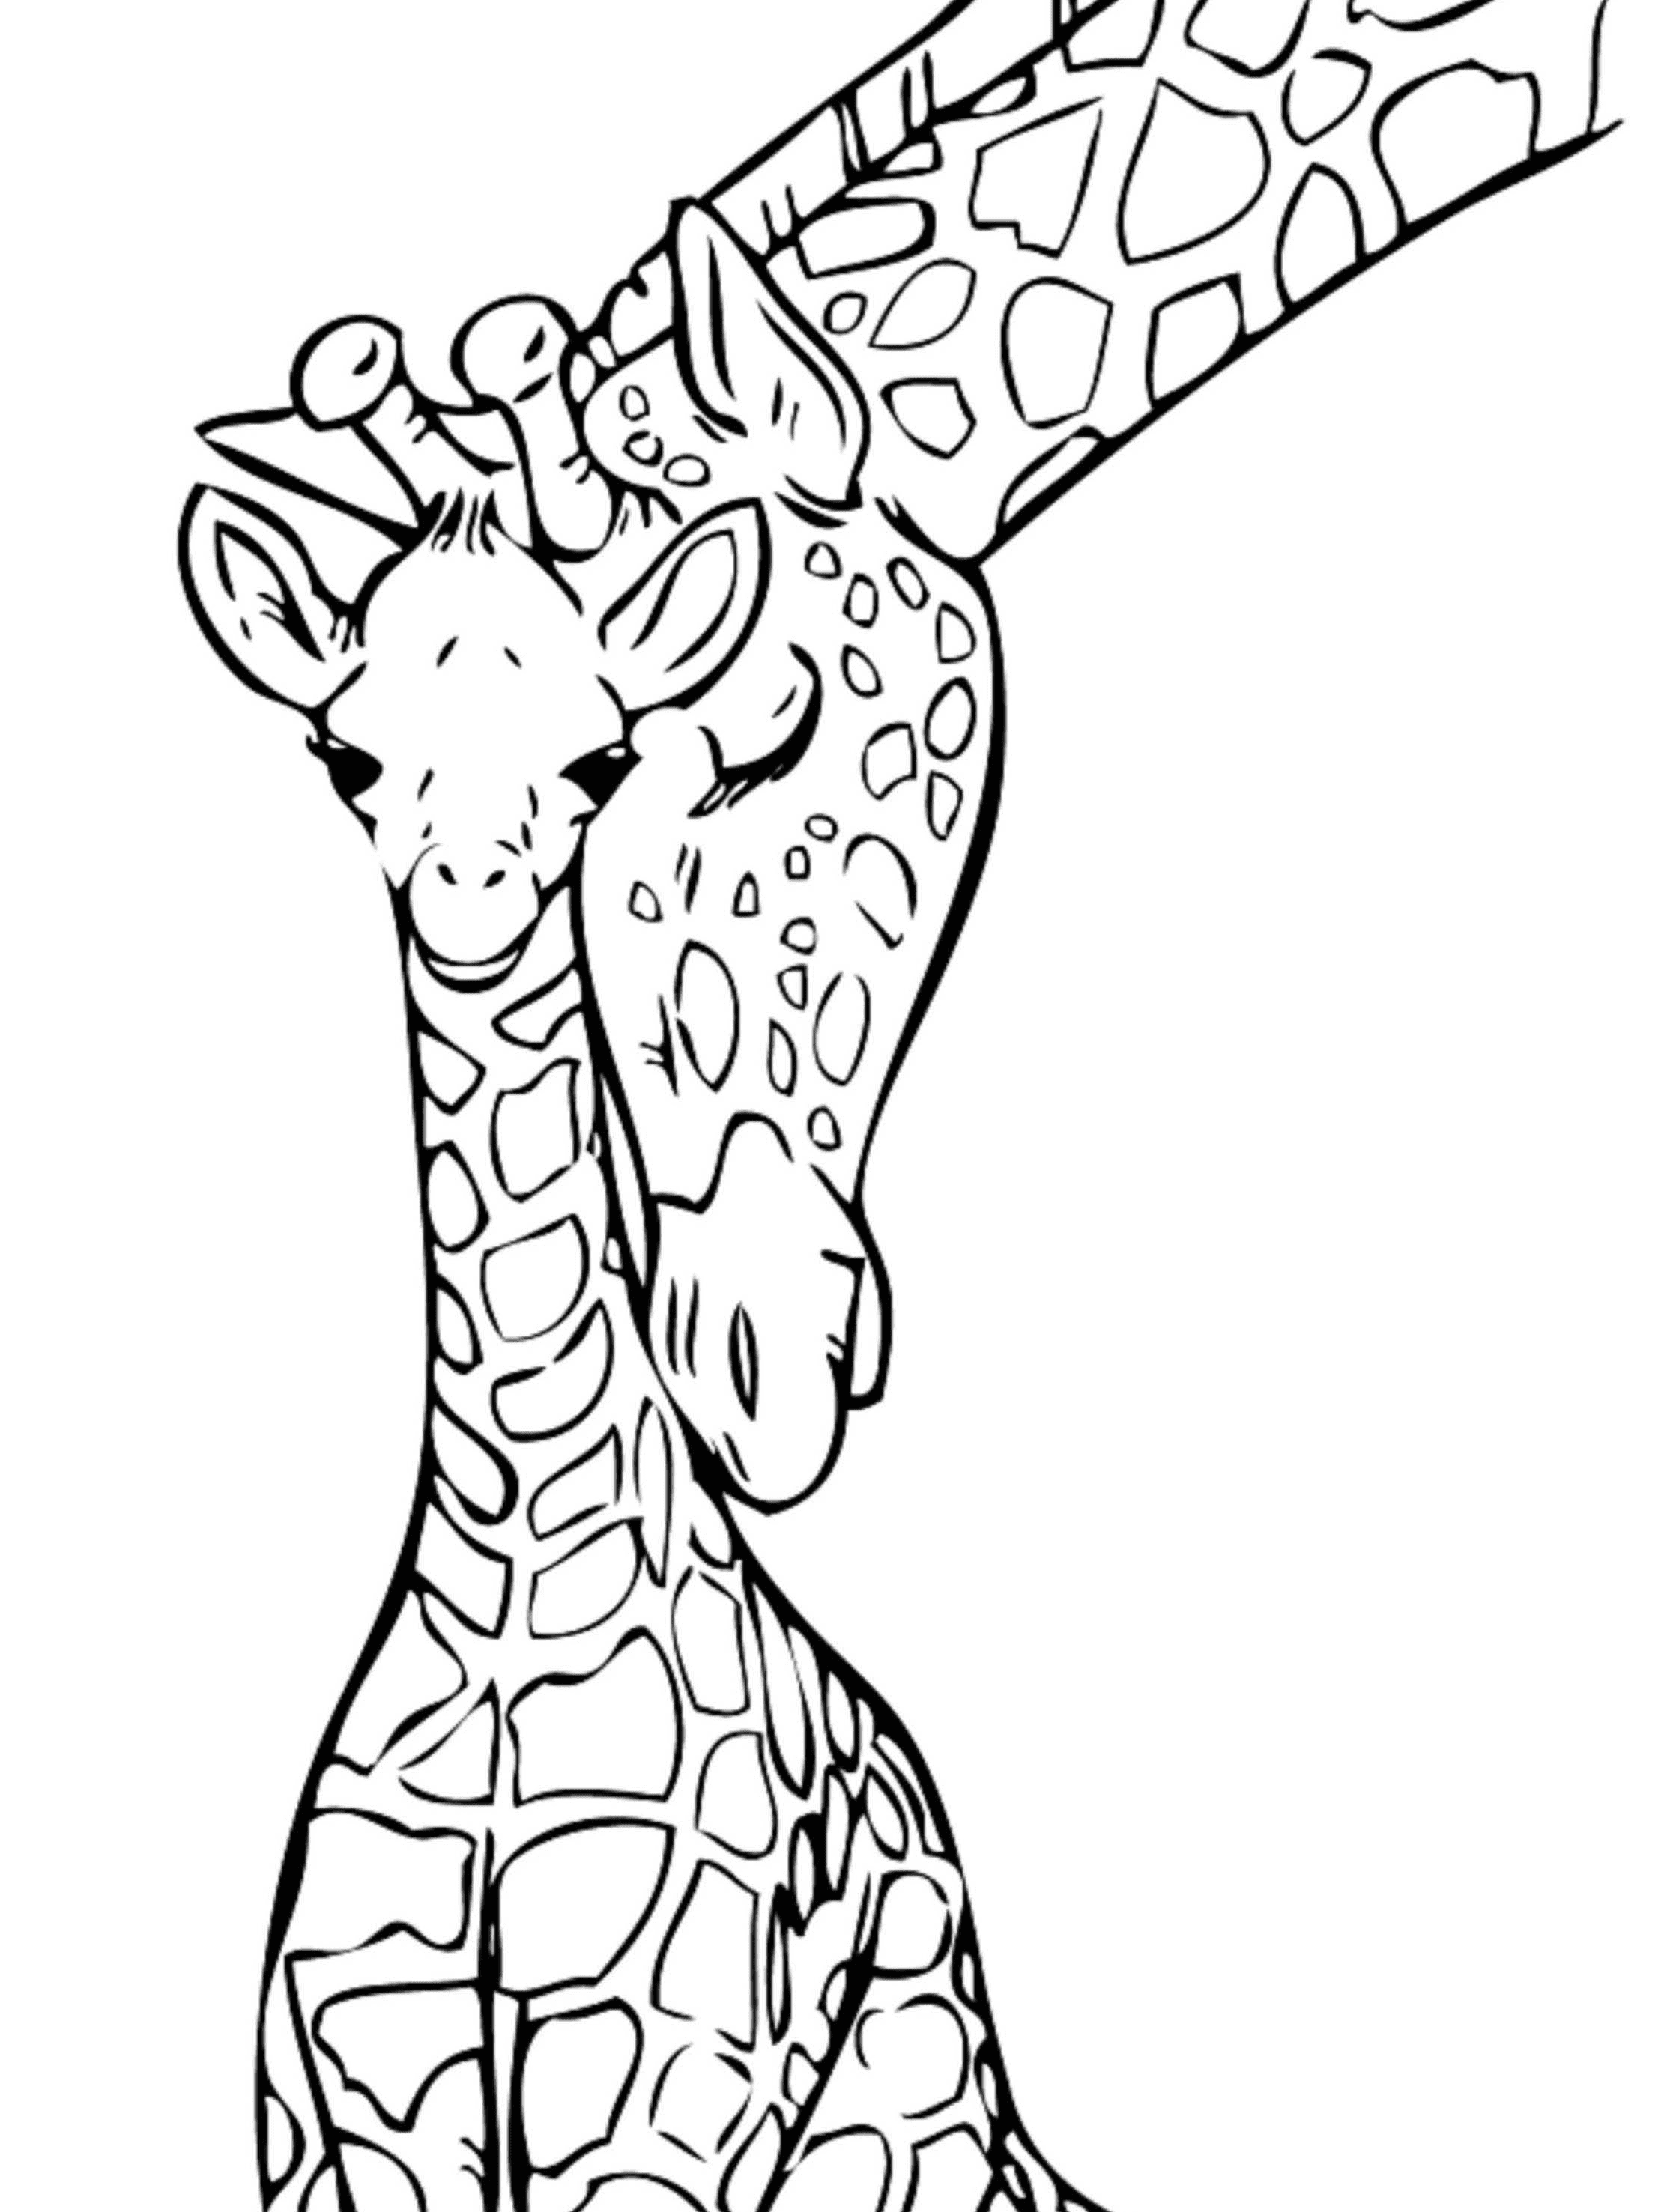 Giraffe Mother and Child Coloring Pages